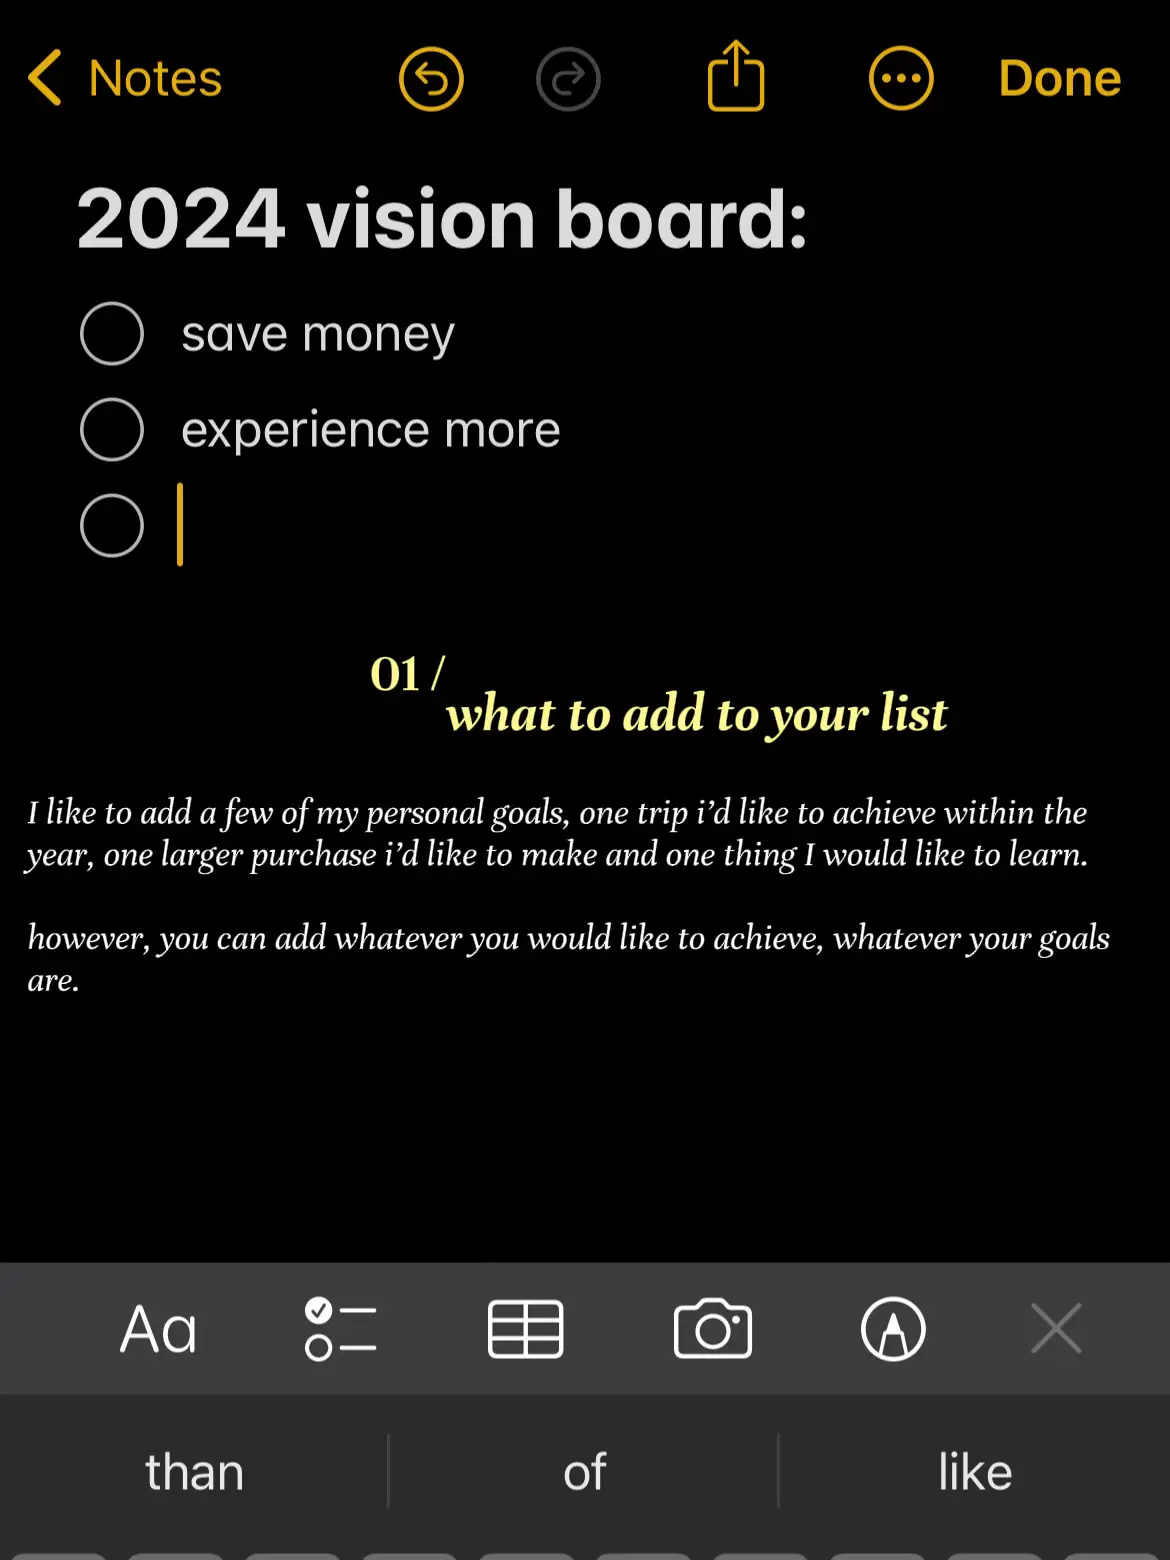 Vision board: How to create one to reach your 2024 goals